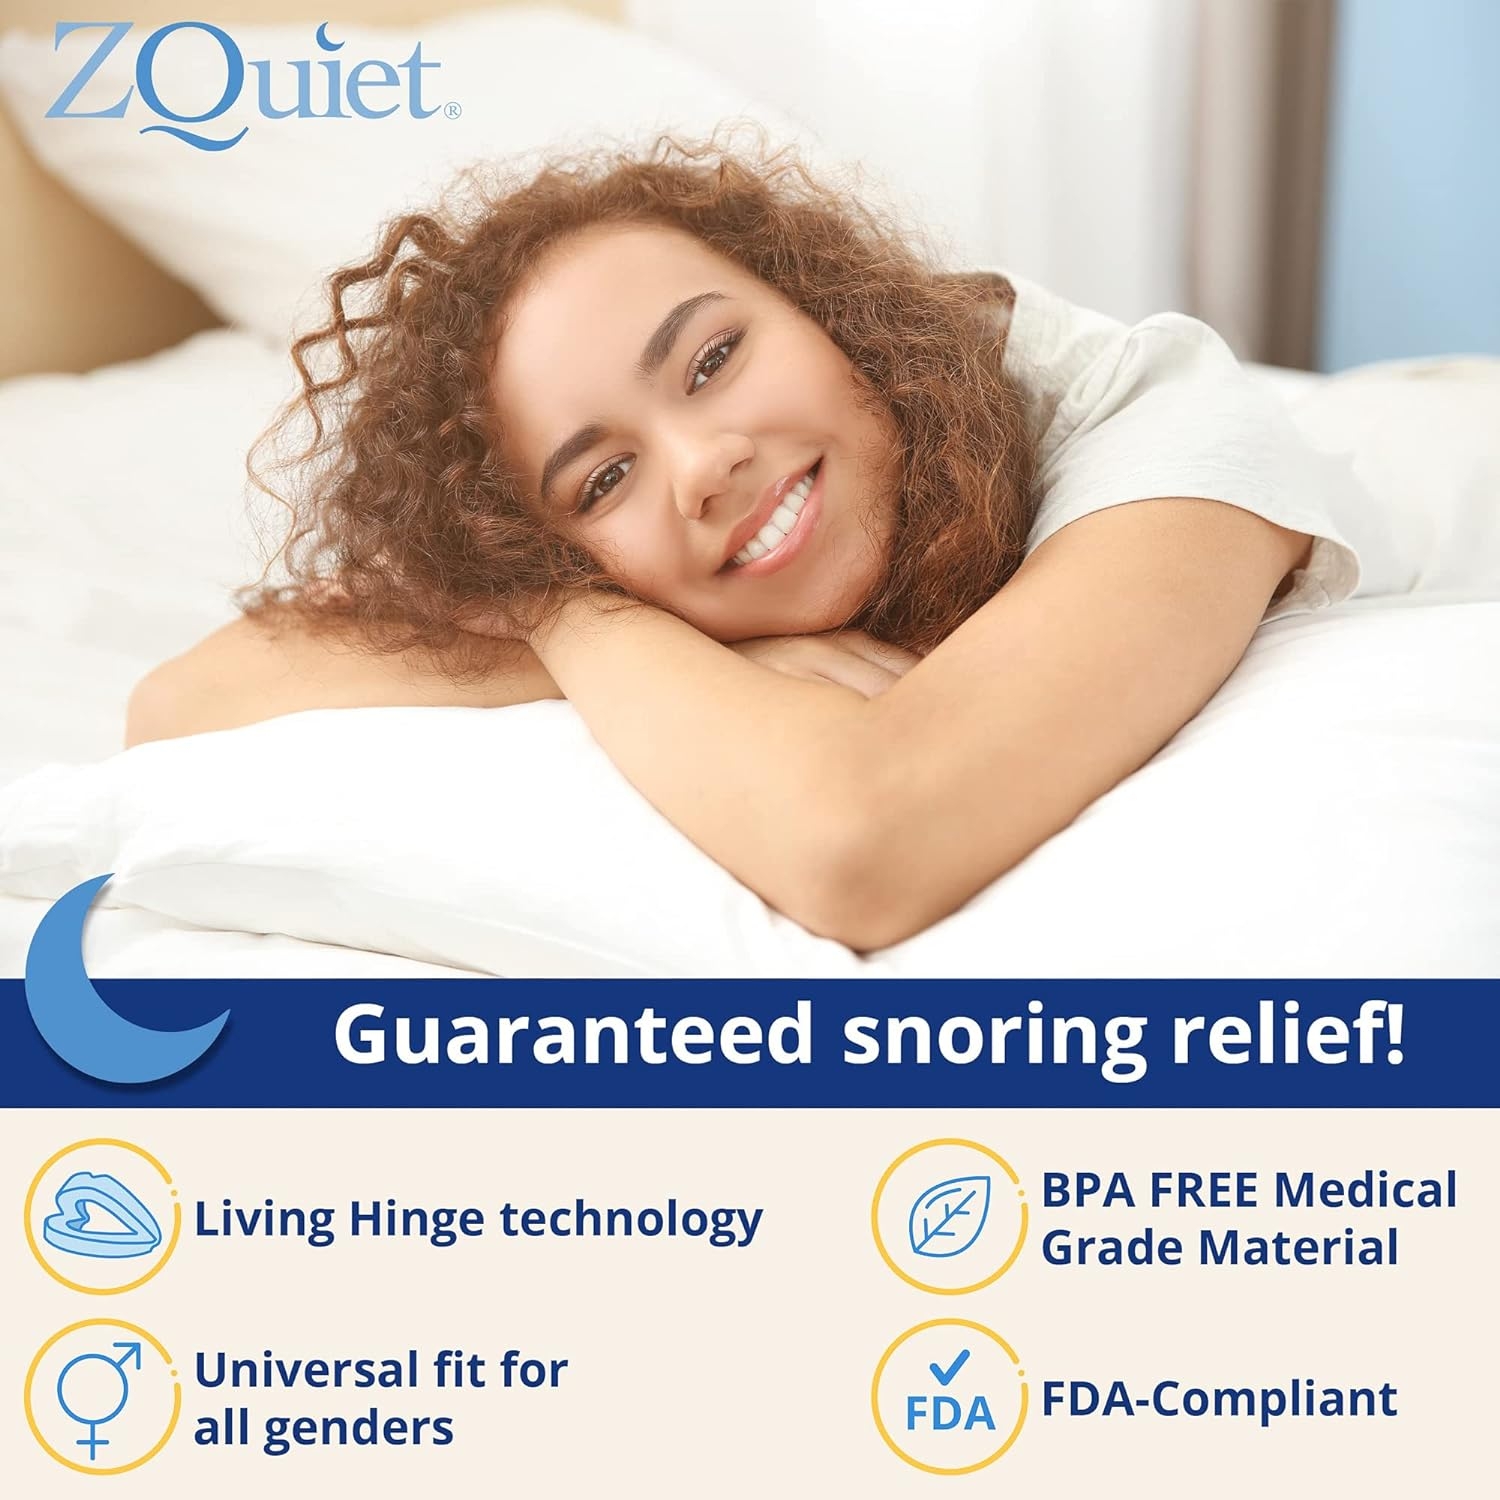 ZQuiet Anti-Snoring Mouthpiece Solution - Comfort Size #2 (Single Device) - Made in USA Snoring Solution for a Better Night’s Sleep (Blue)